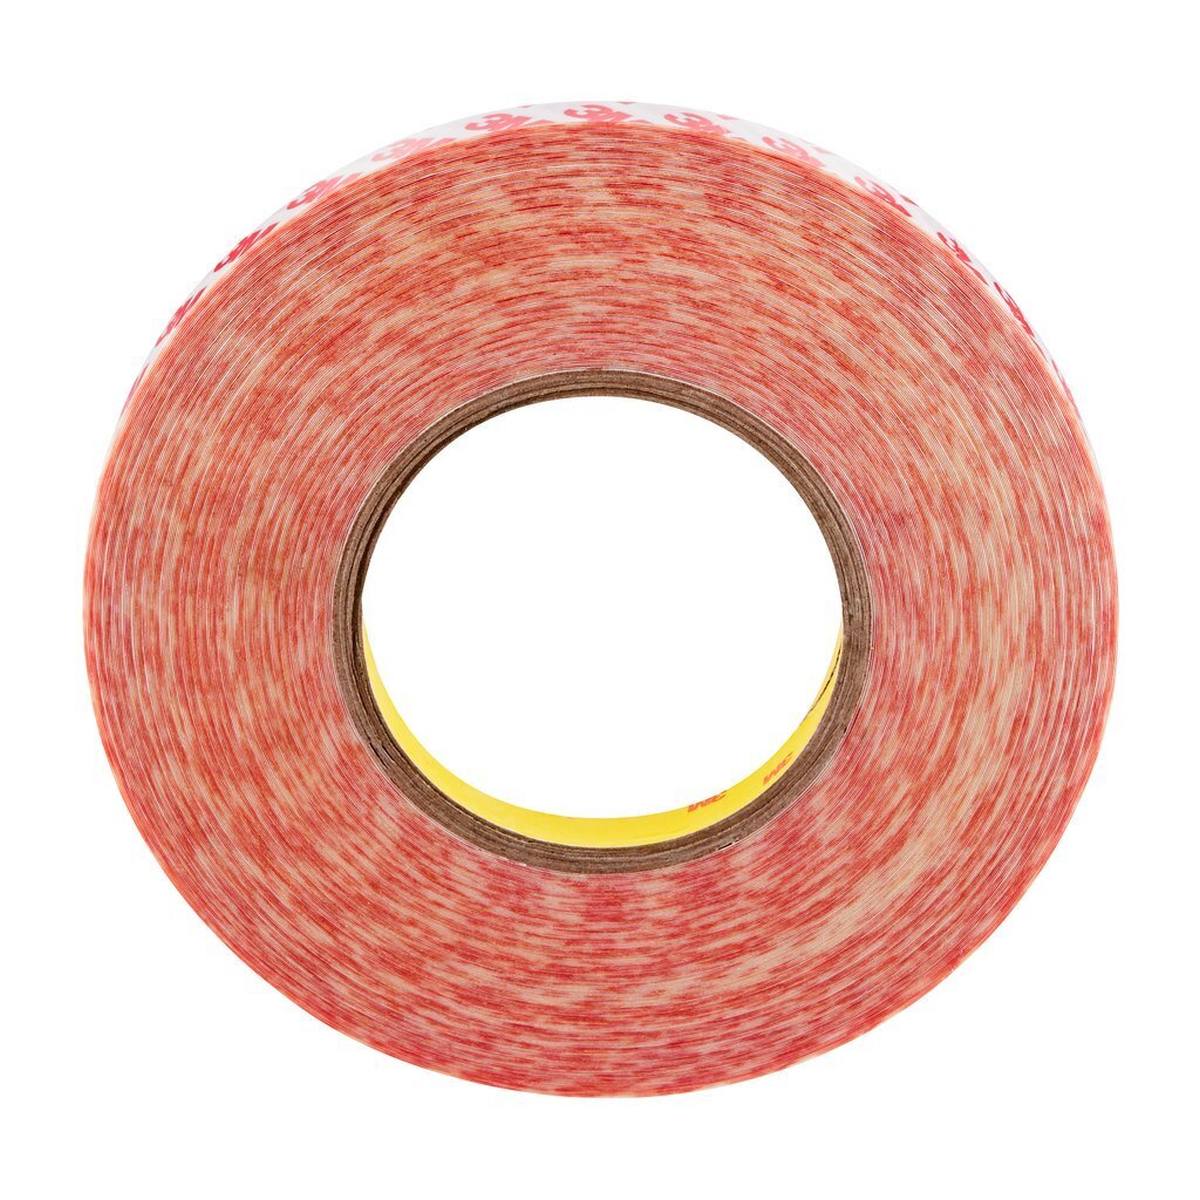 3M Double-sided adhesive tape with polyester backing GPT-020F, transparent, 12 mm x 50 m, 0.202 mm